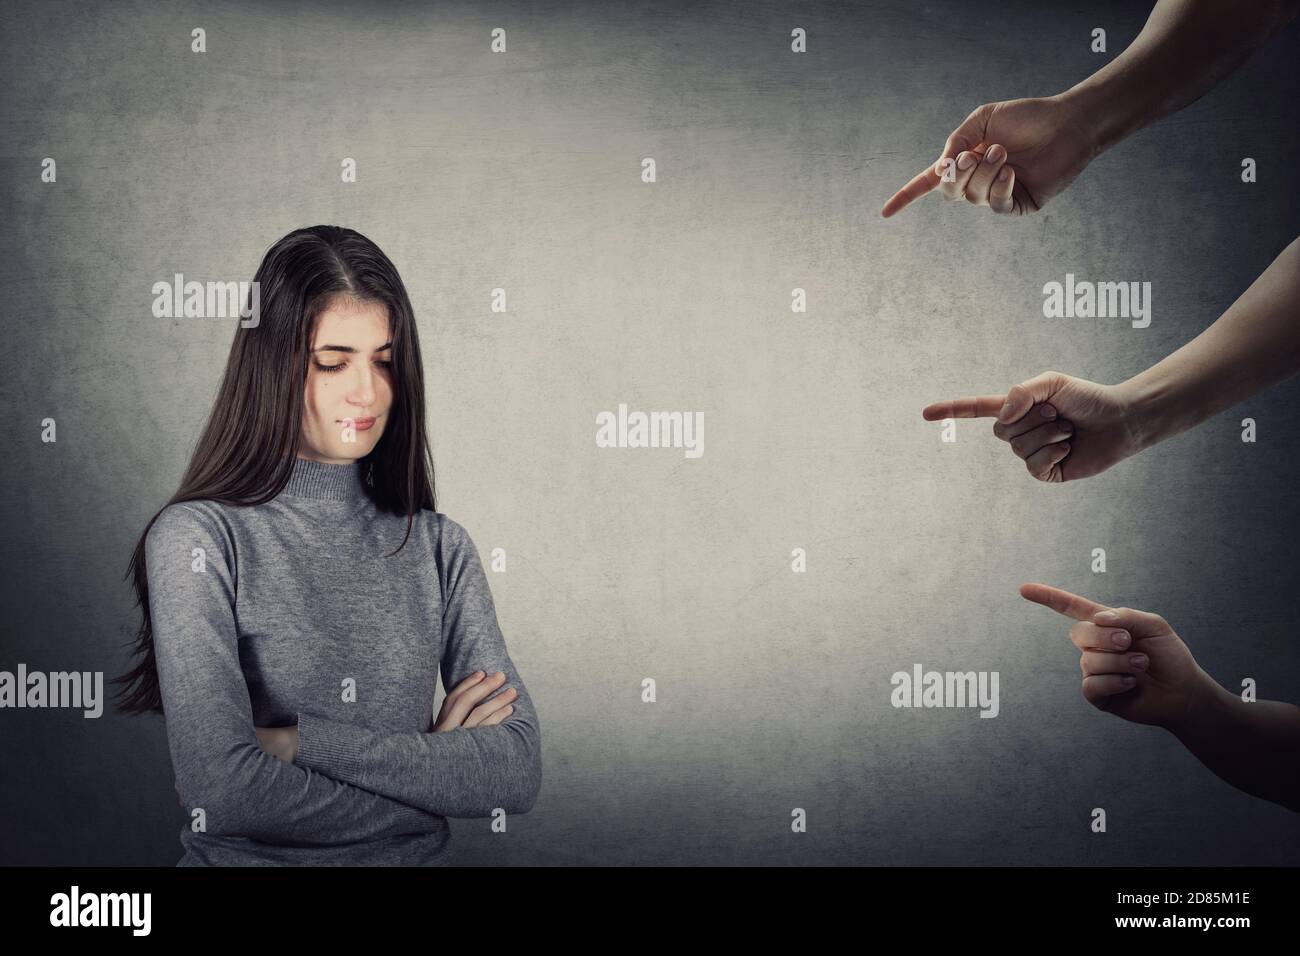 Stressed teenage girl, under pressure, looking down feel ashamed and discomfort as multiple hands pointing forefingers, blaming as guilty. Upset stude Stock Photo